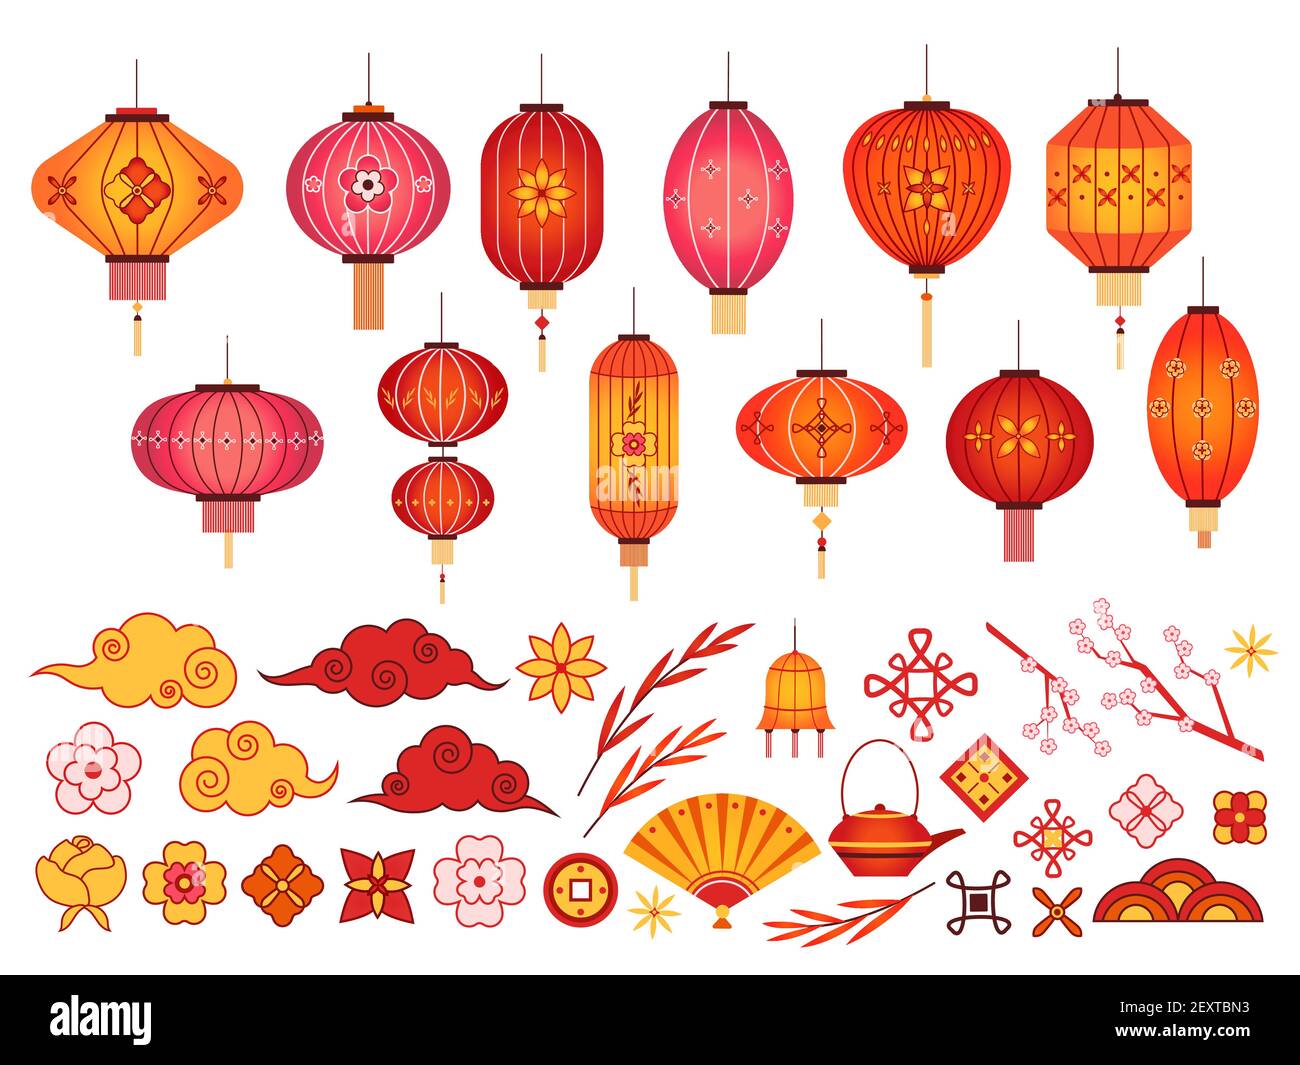 https://c8.alamy.com/comp/2EXTBN3/chinese-new-year-elements-asian-lantern-japanese-cloud-and-sakura-branch-traditional-korean-flower-and-pattern-festive-2020-vector-set-illustration-chinese-lantern-and-traditional-decoration-2EXTBN3.jpg